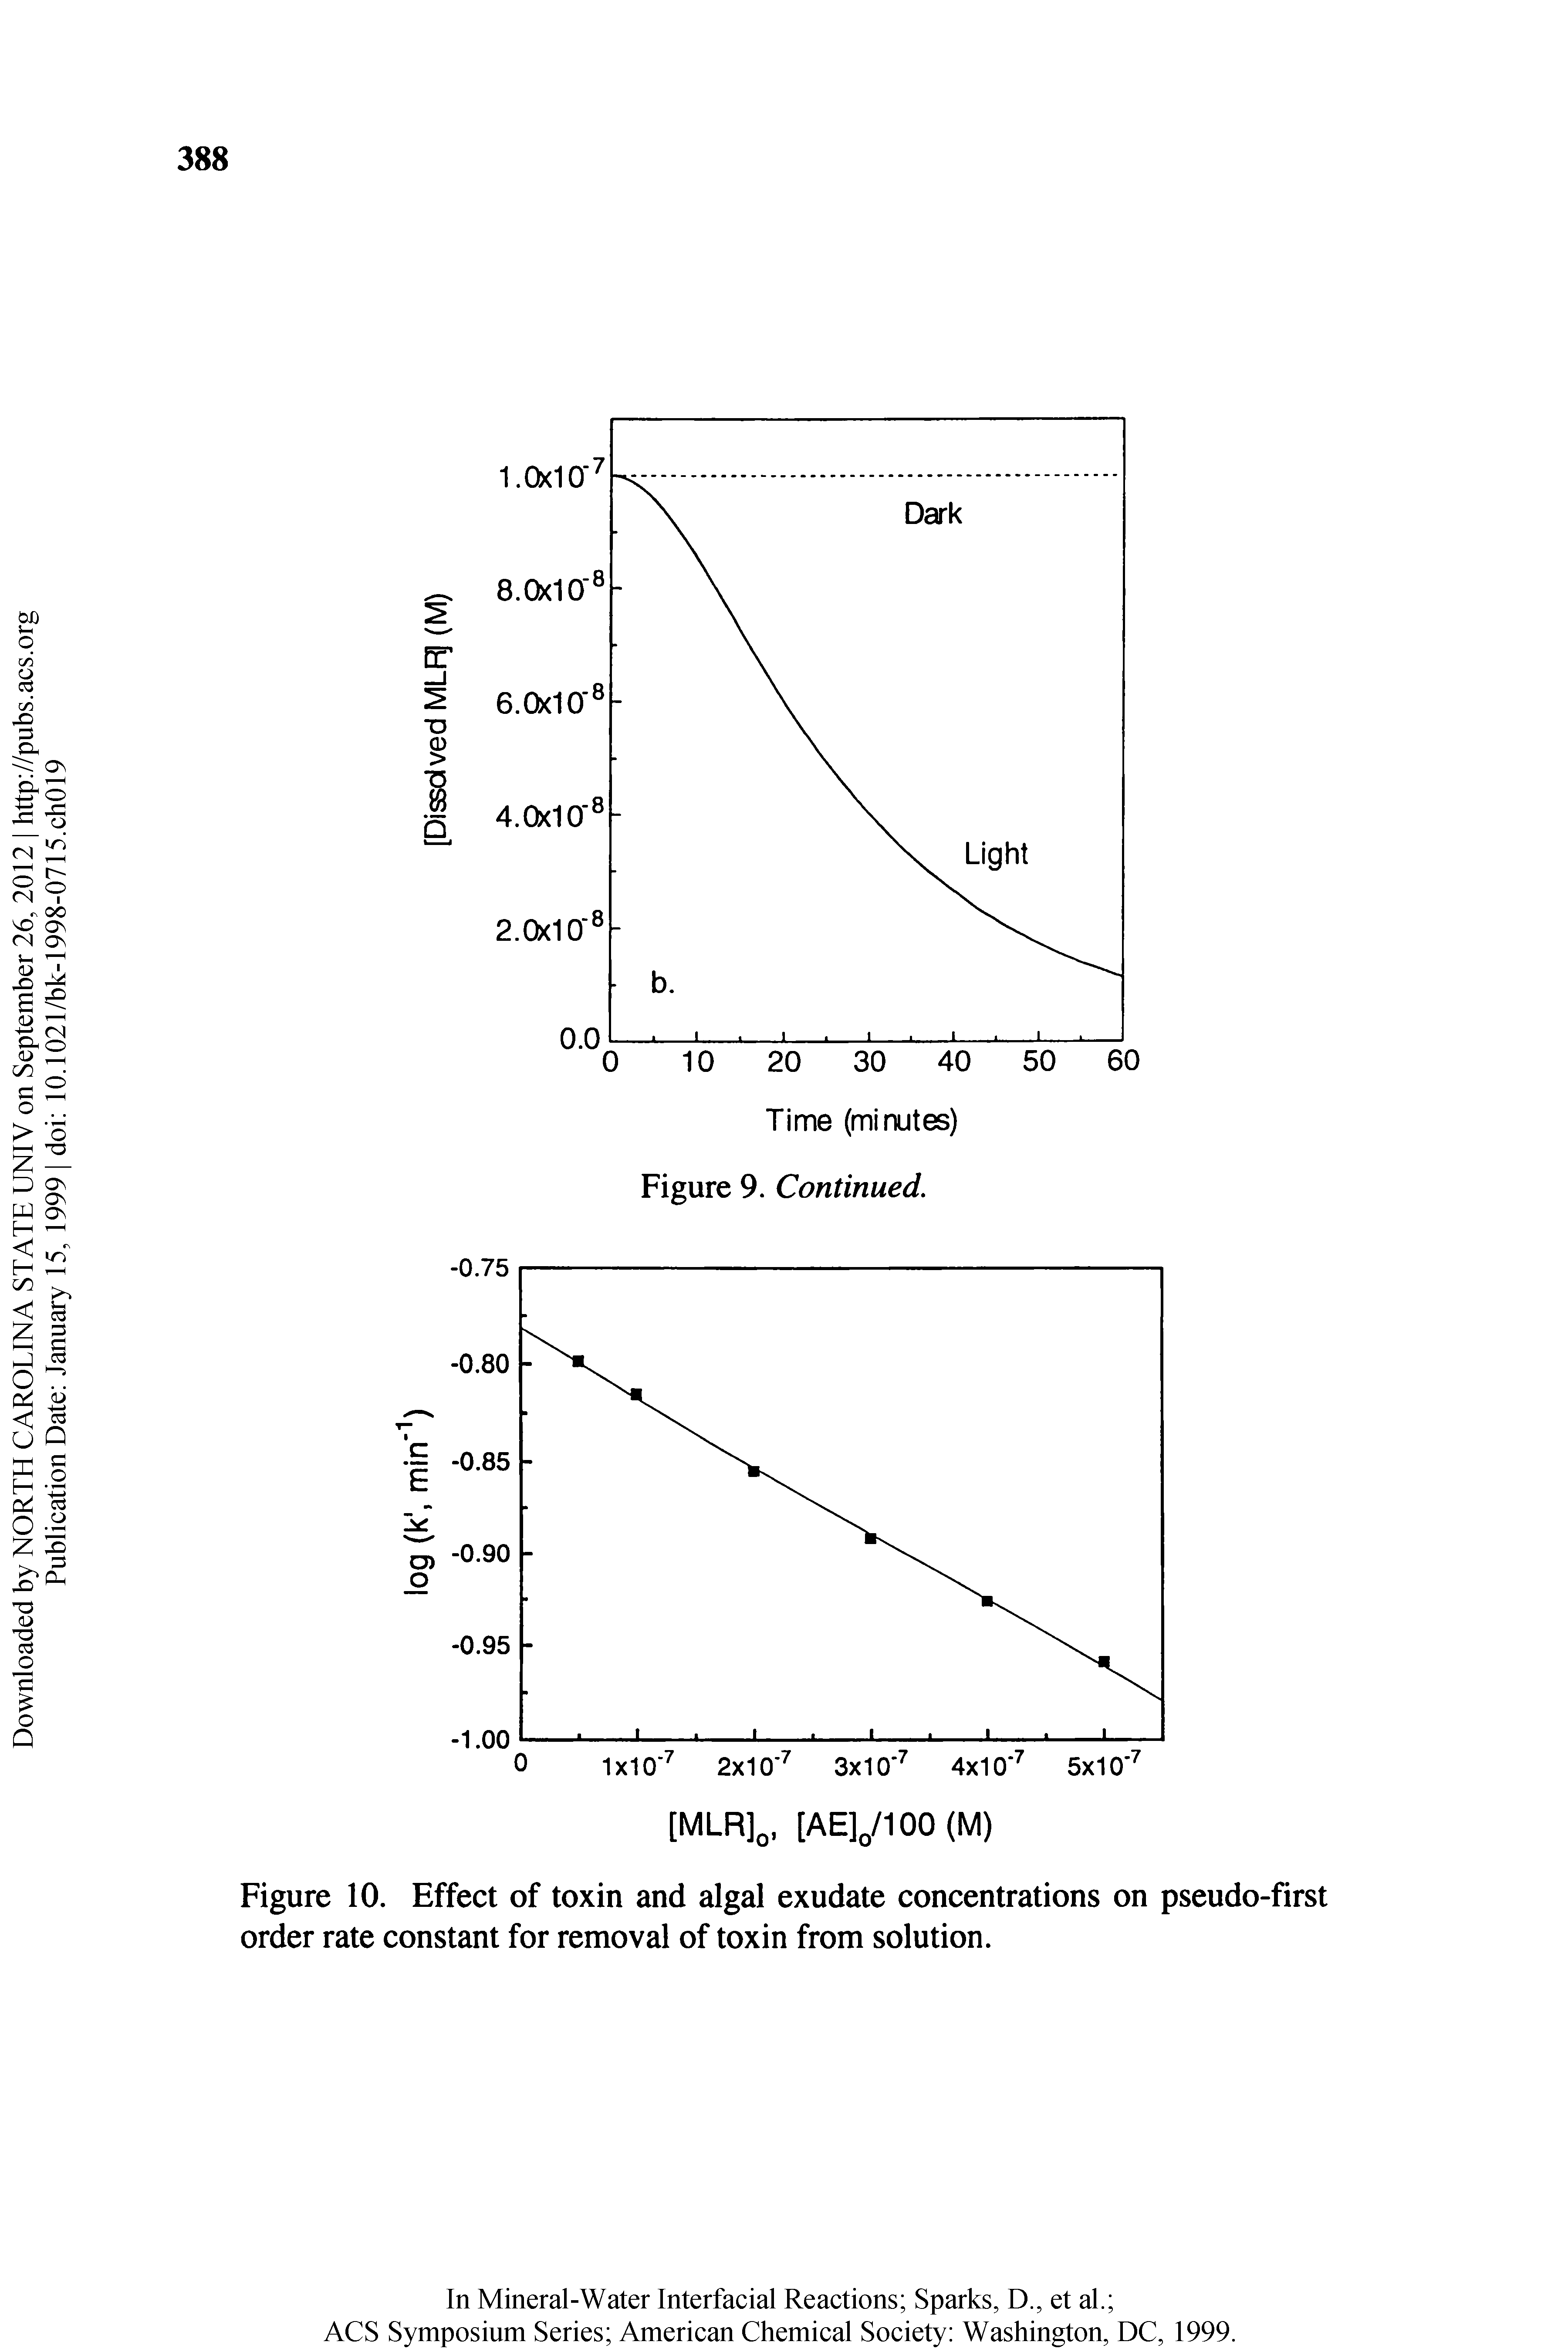 Figure 10. Effect of toxin and algal exudate concentrations on pseudo-first order rate constant for removal of toxin from solution.